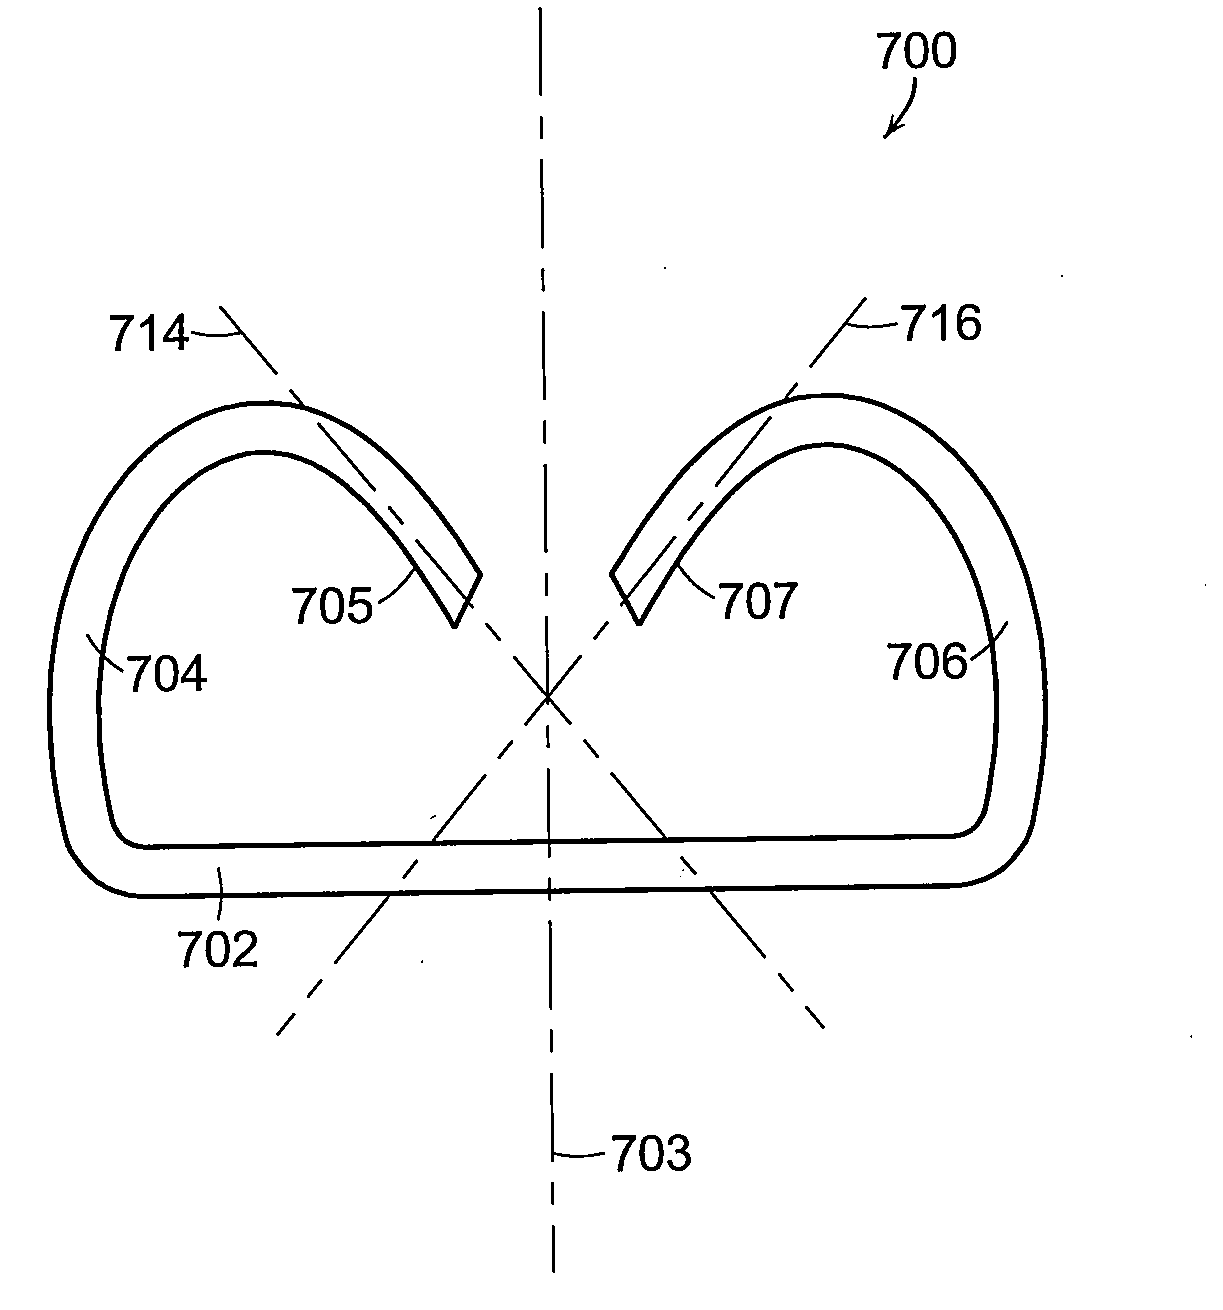 Method for forming a staple